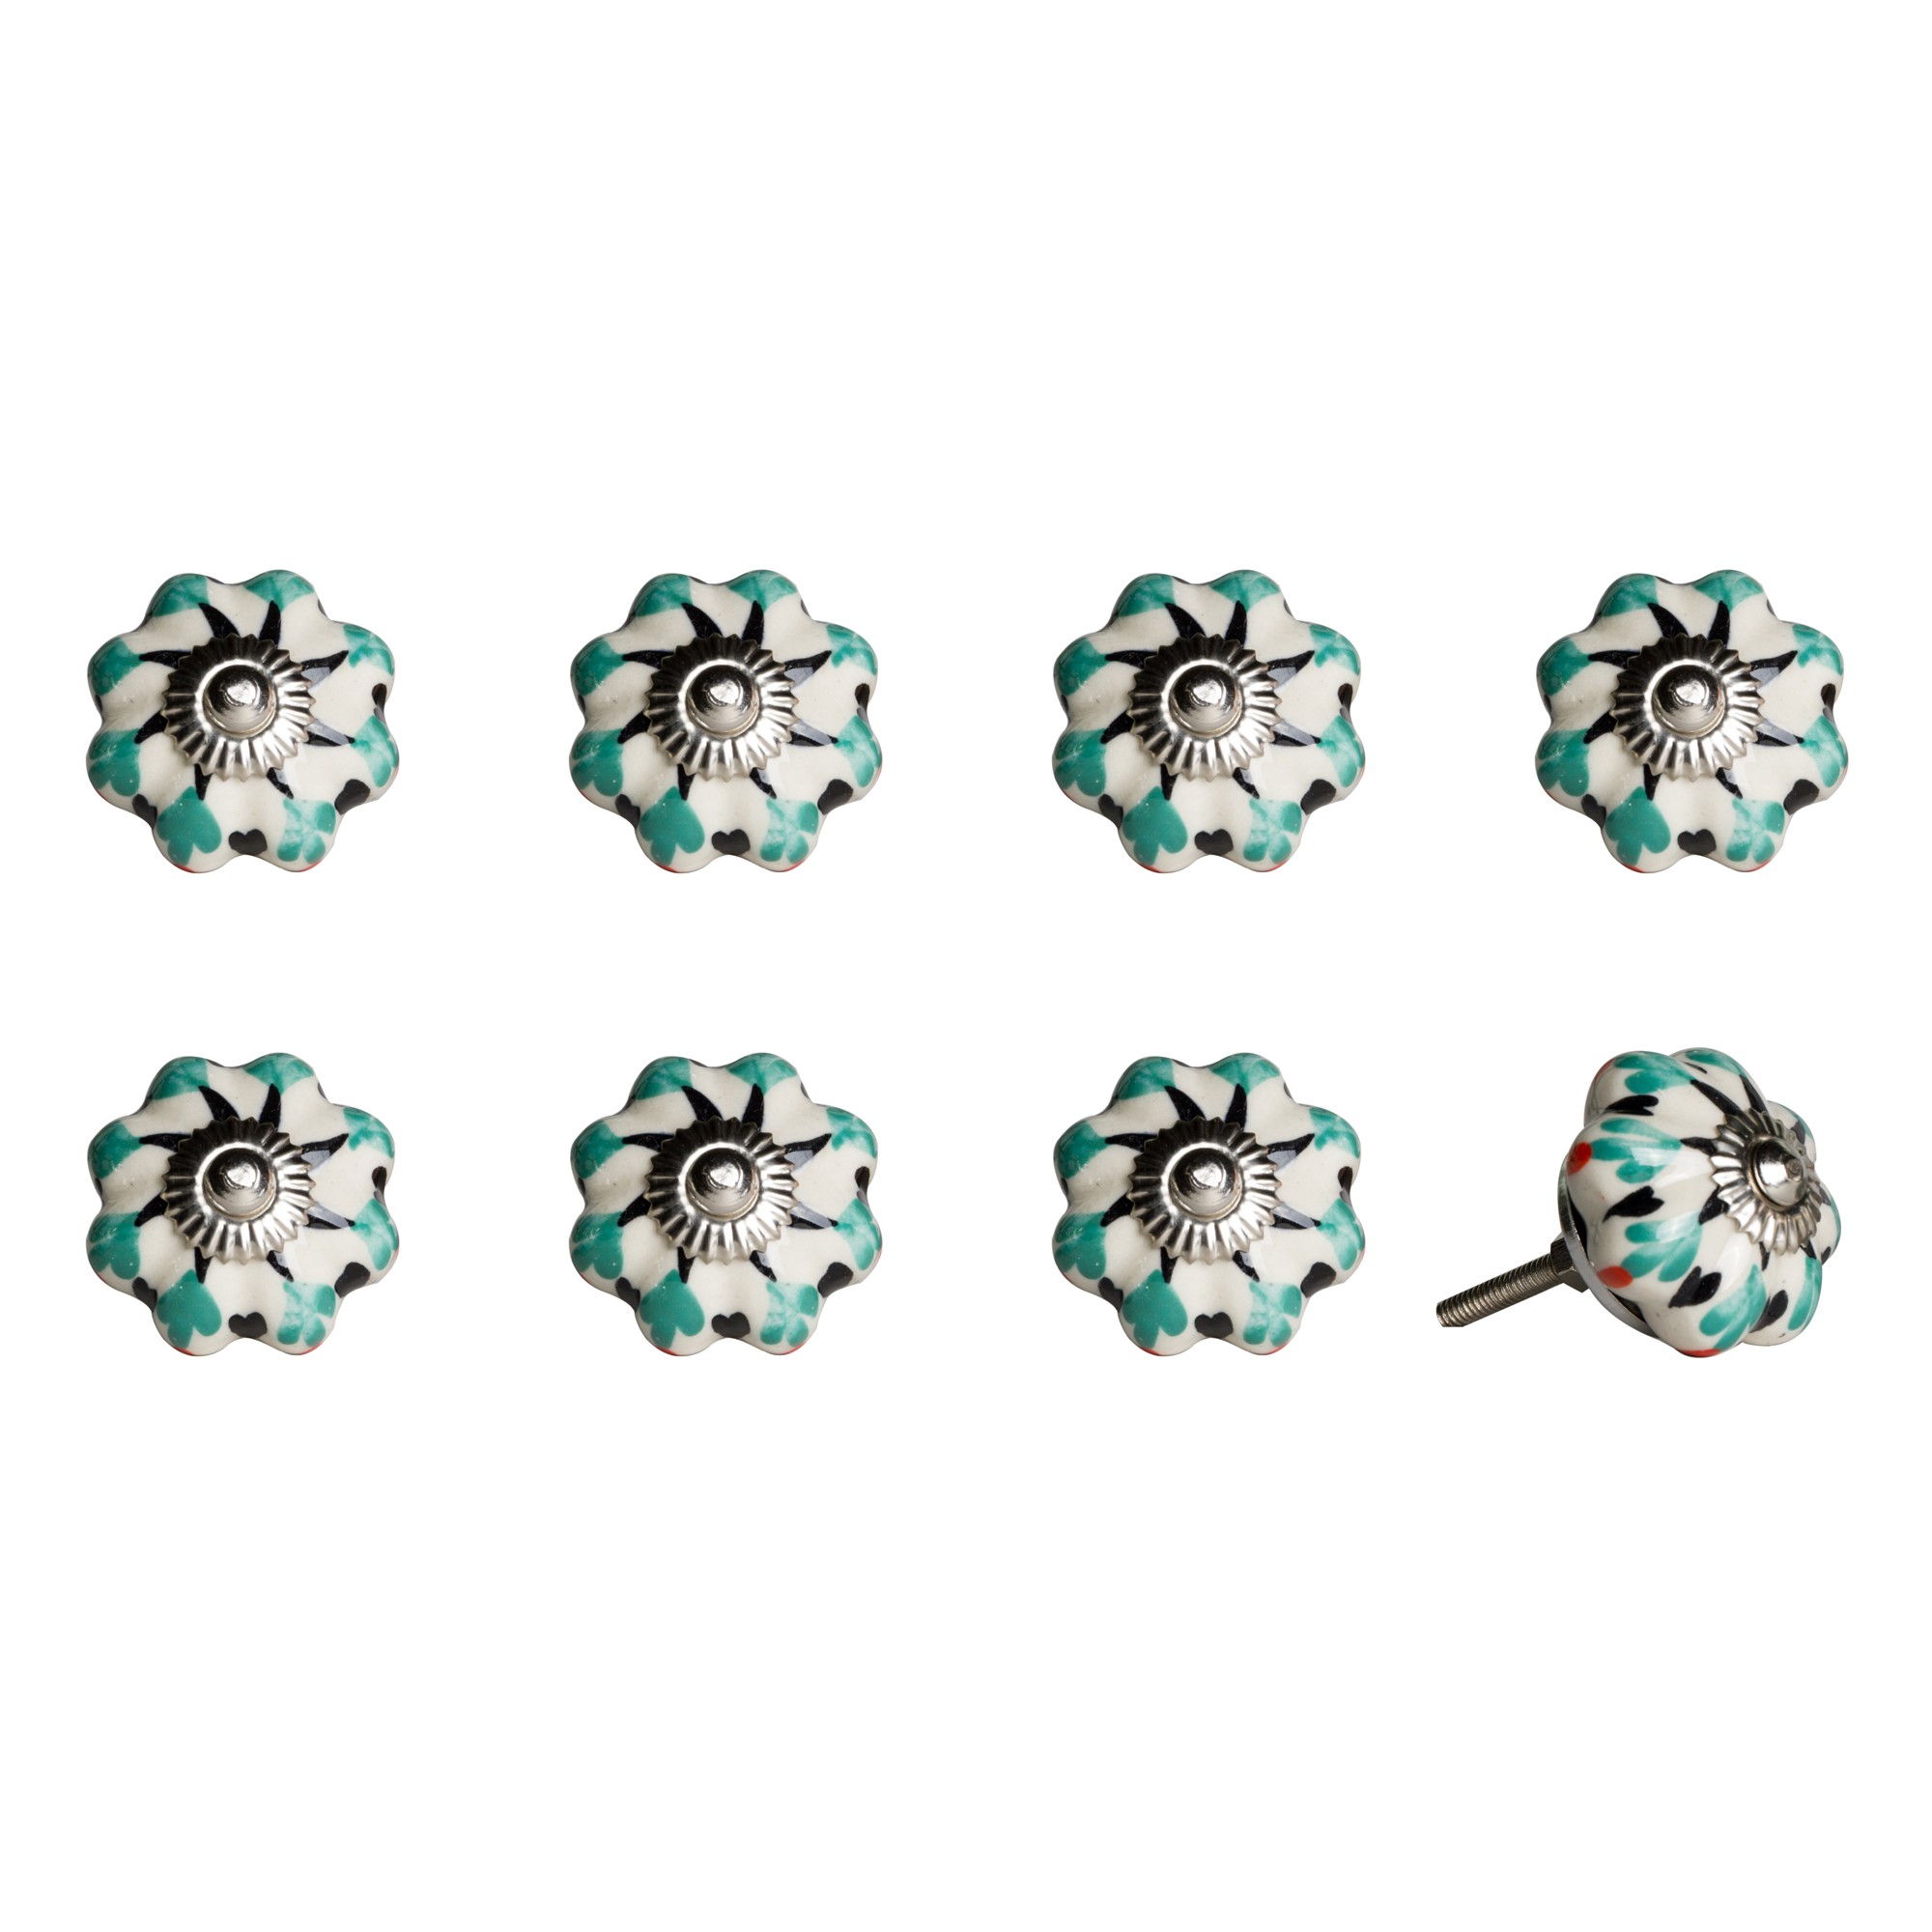 1.5" x 1.5" x 1.5" Hues Of White, Green And Black - Knobs 8-Pack